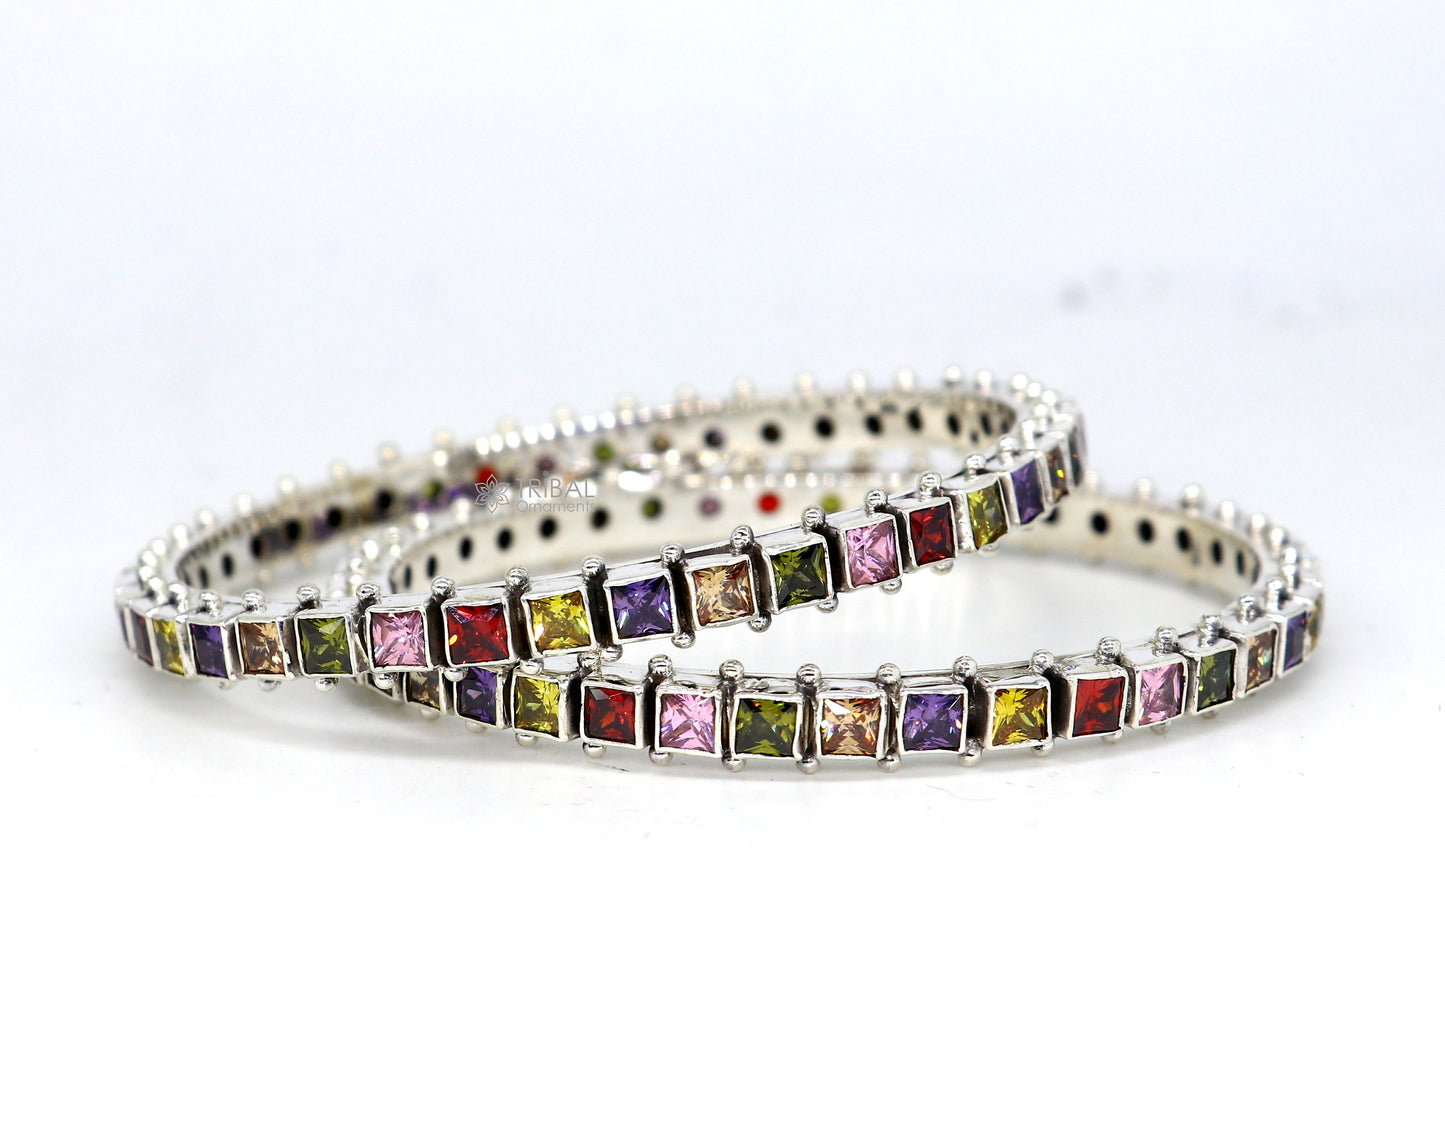 925 sterling silver multicolor square shape stone wedding anniversary gifting functional bangle bracelet  vintage tribal jewelry nba406 - TRIBAL ORNAMENTS